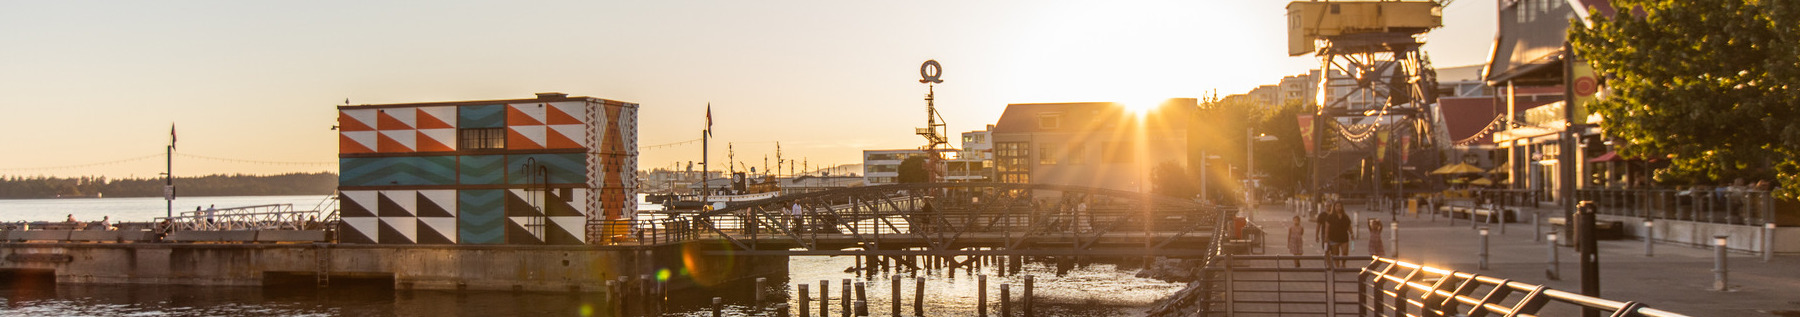 The Shipyards at Golden Hour